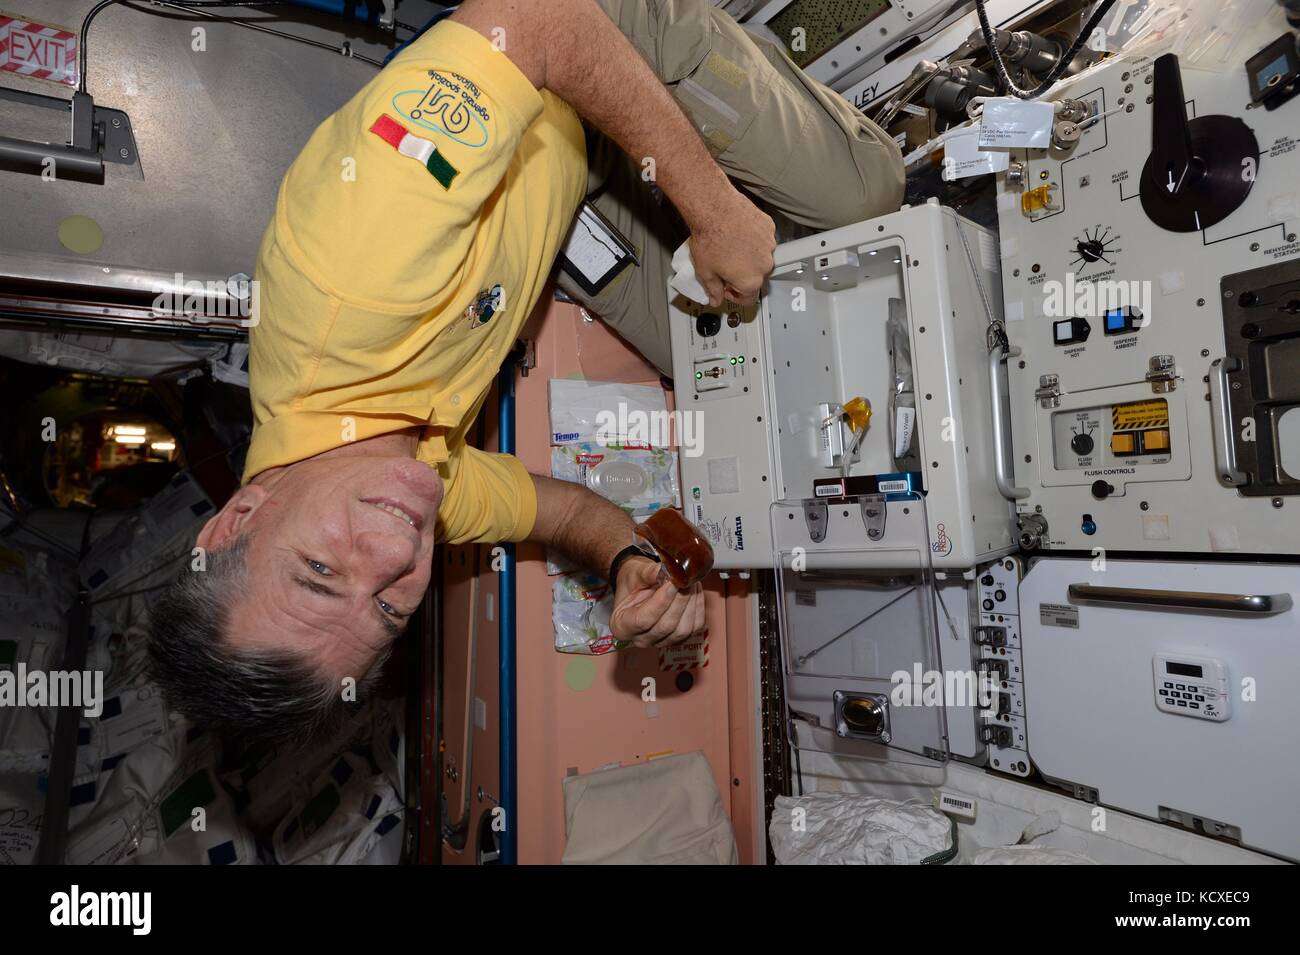 International Space Station Expedition 53 Italian astronaut Paolo Nespoli prepares an espresso coffee in space to celebrate World Coffee Day September 29, 2017 in Earth Orbit. Stock Photo